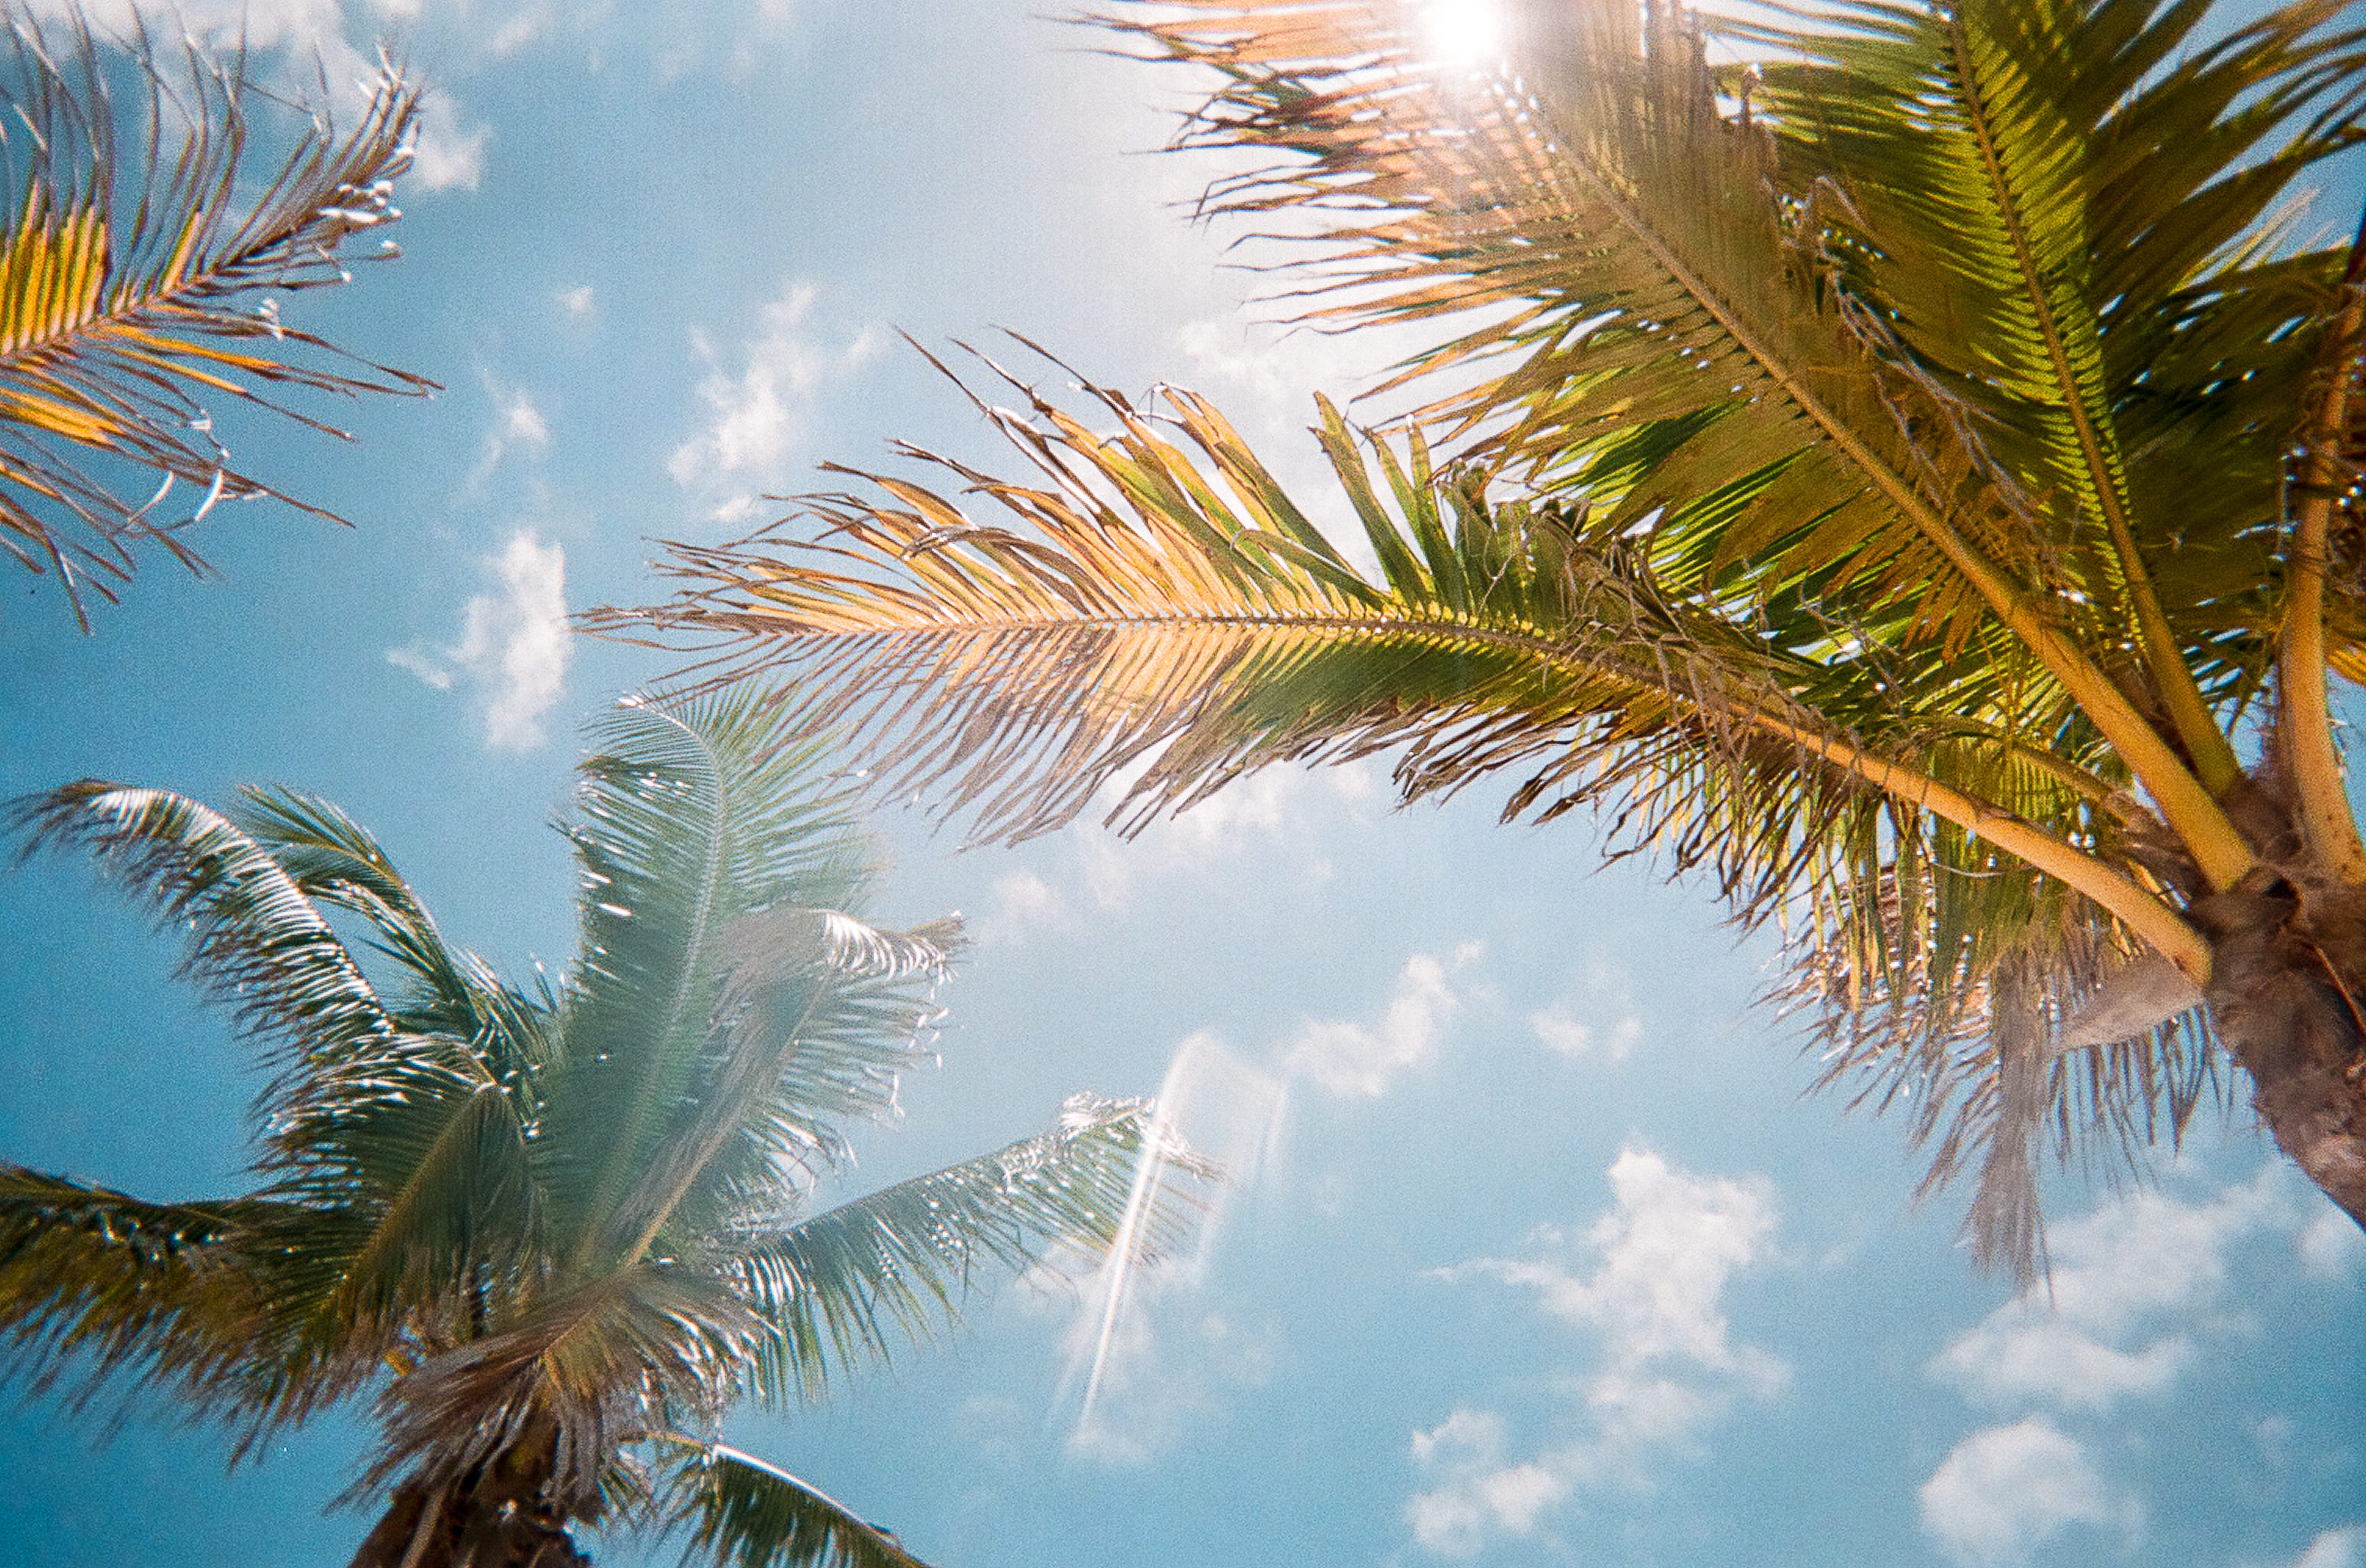 low angle photography of green palm trees during daytime, low-angle photography of coconut trees